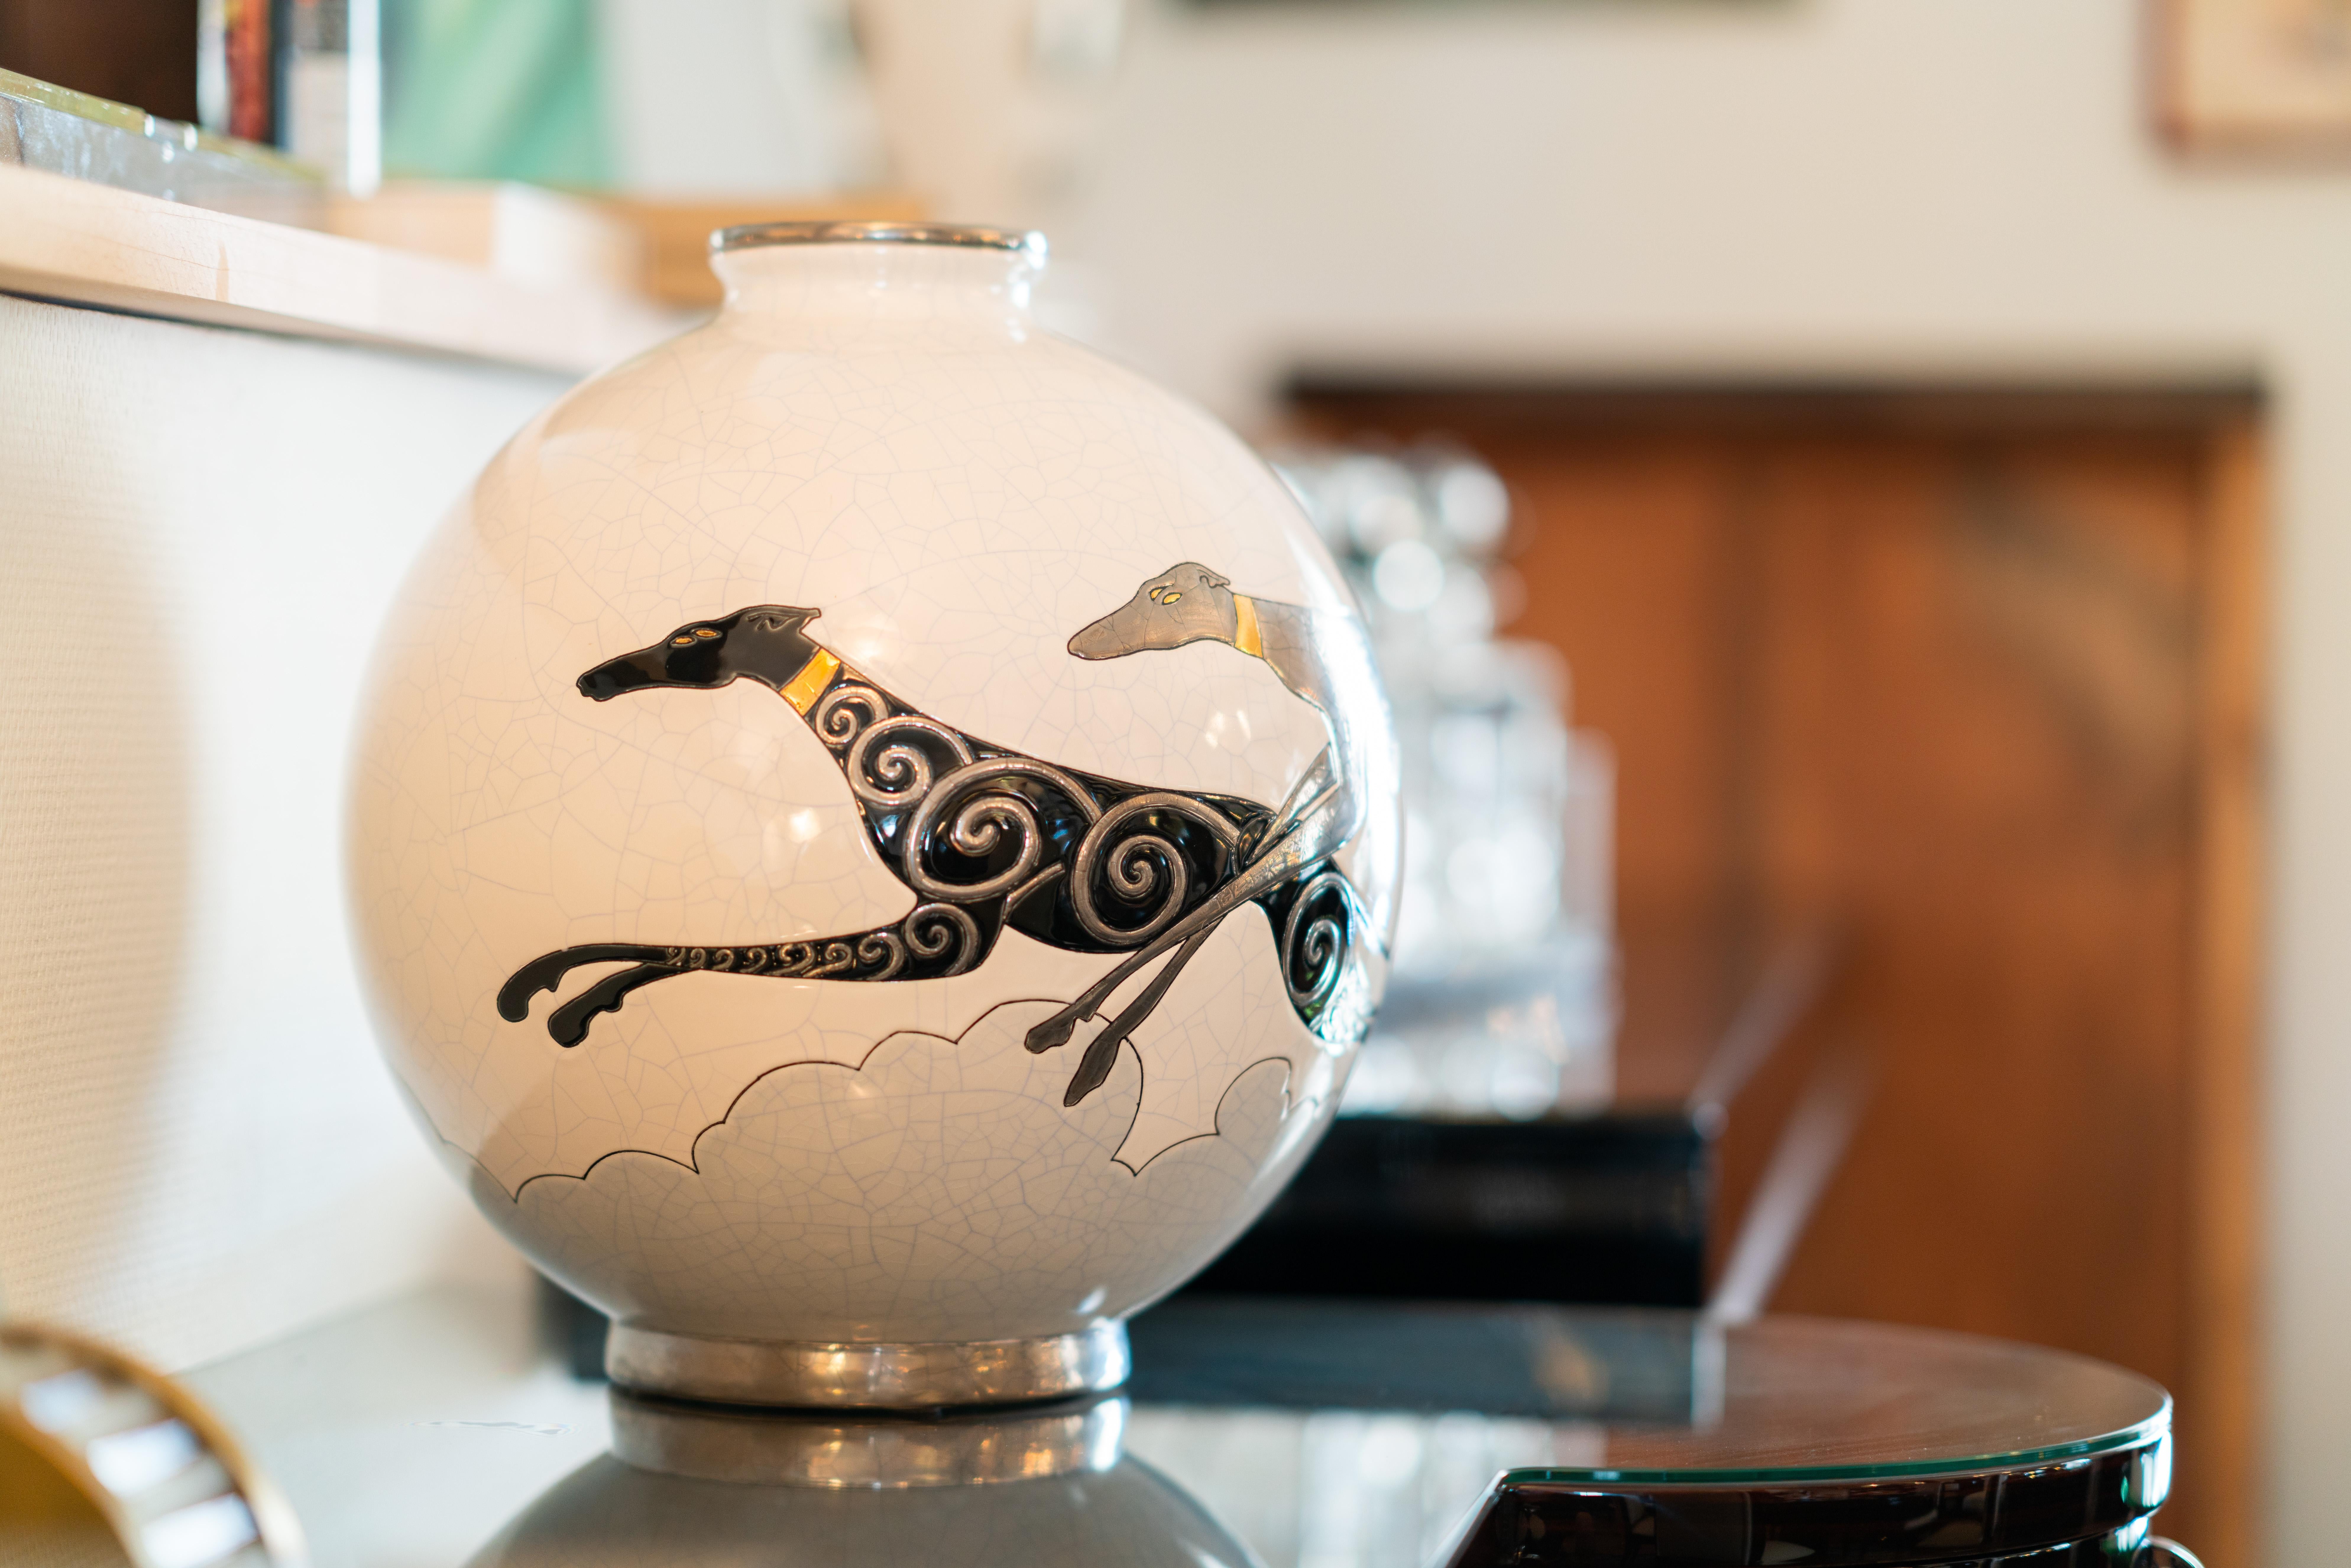 Emaux de Longwy ceramic vase with craqueling glaze
White body with greyhounds 
Limited edition of 50 objects 

Danillo Curetti (1953-1993) was one of the first great names in the contemporary creations of Les Emaux de Longwy. The edition of this